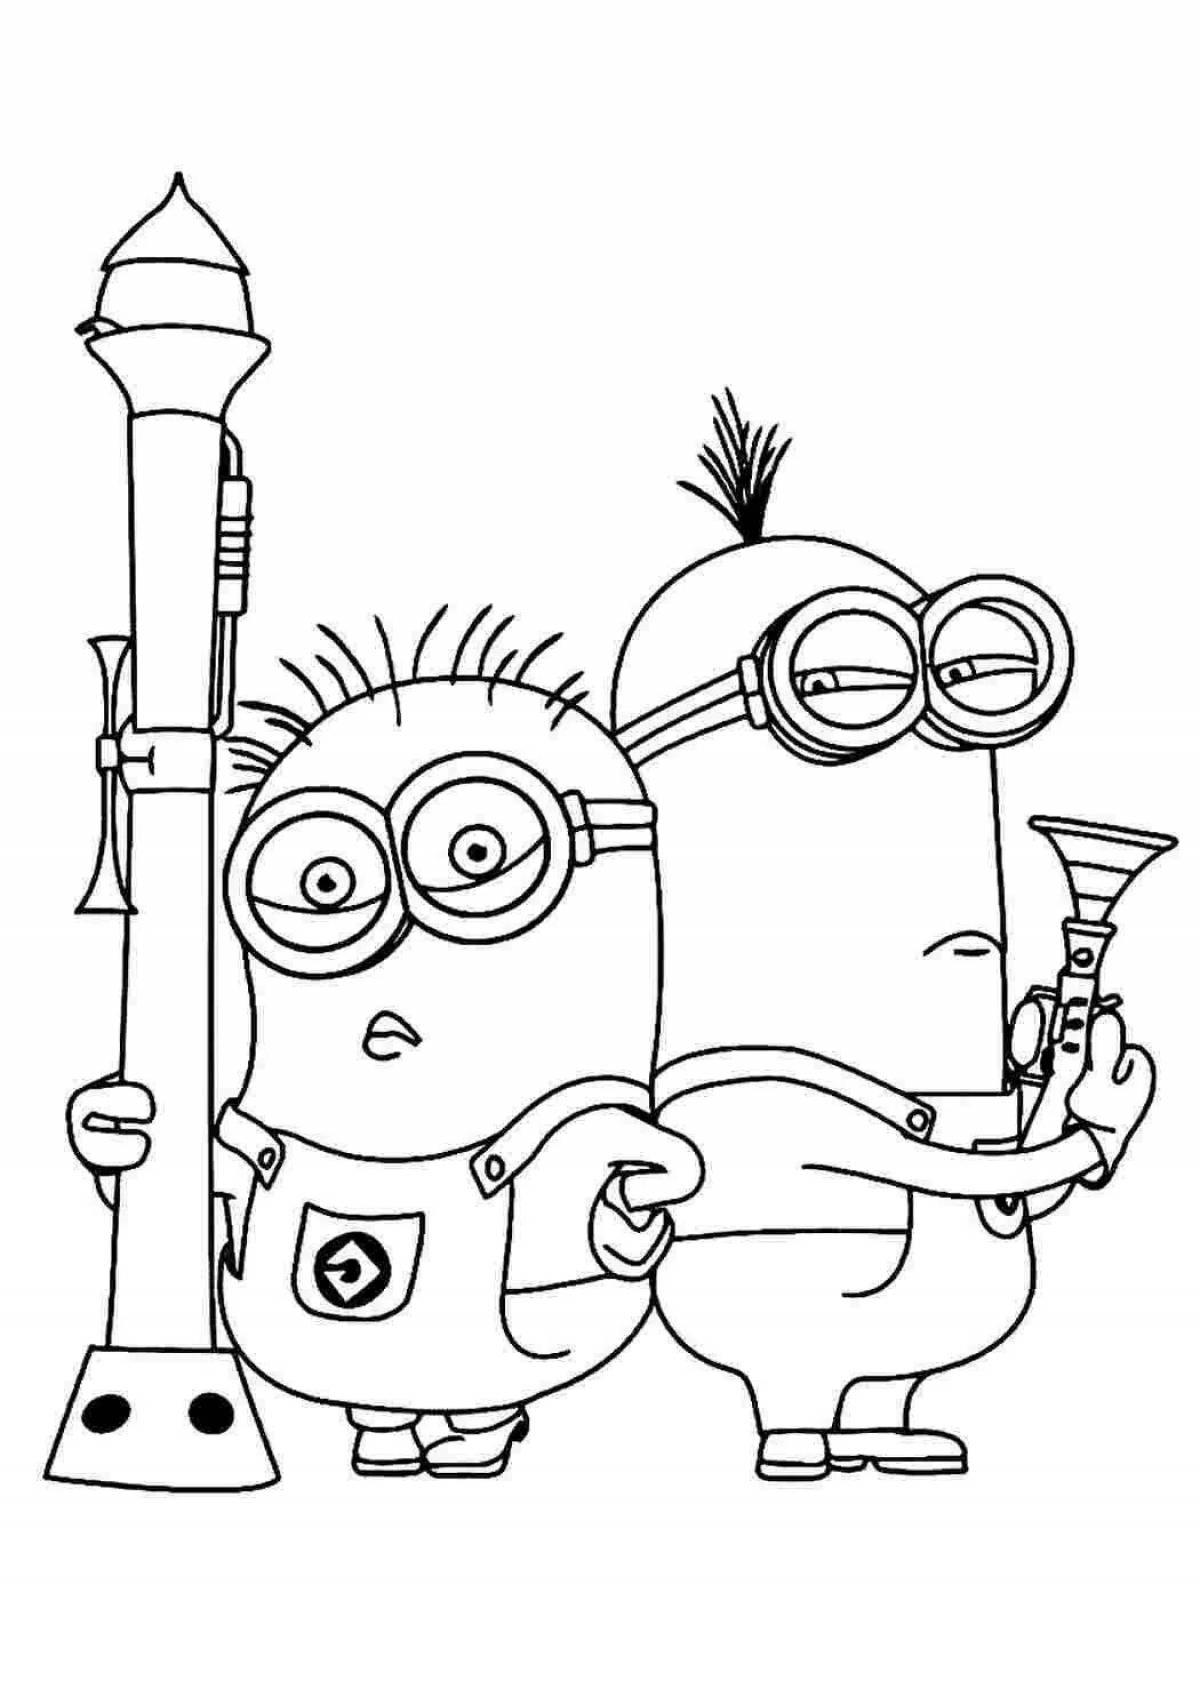 Minions humorous coloring book